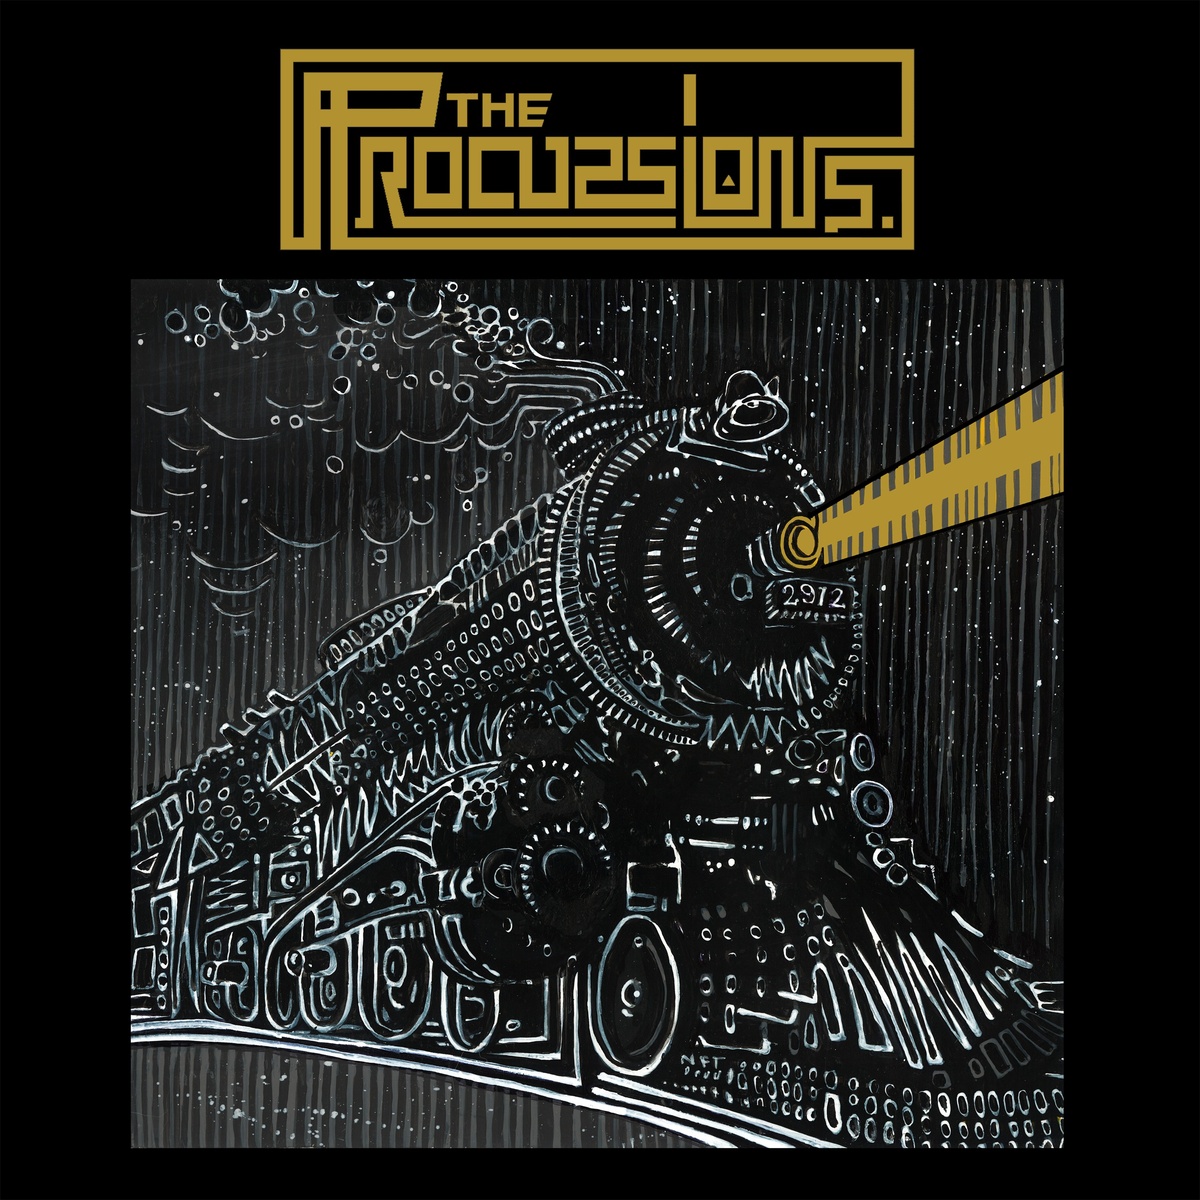 The Procussions - "The Procussions" (Release)